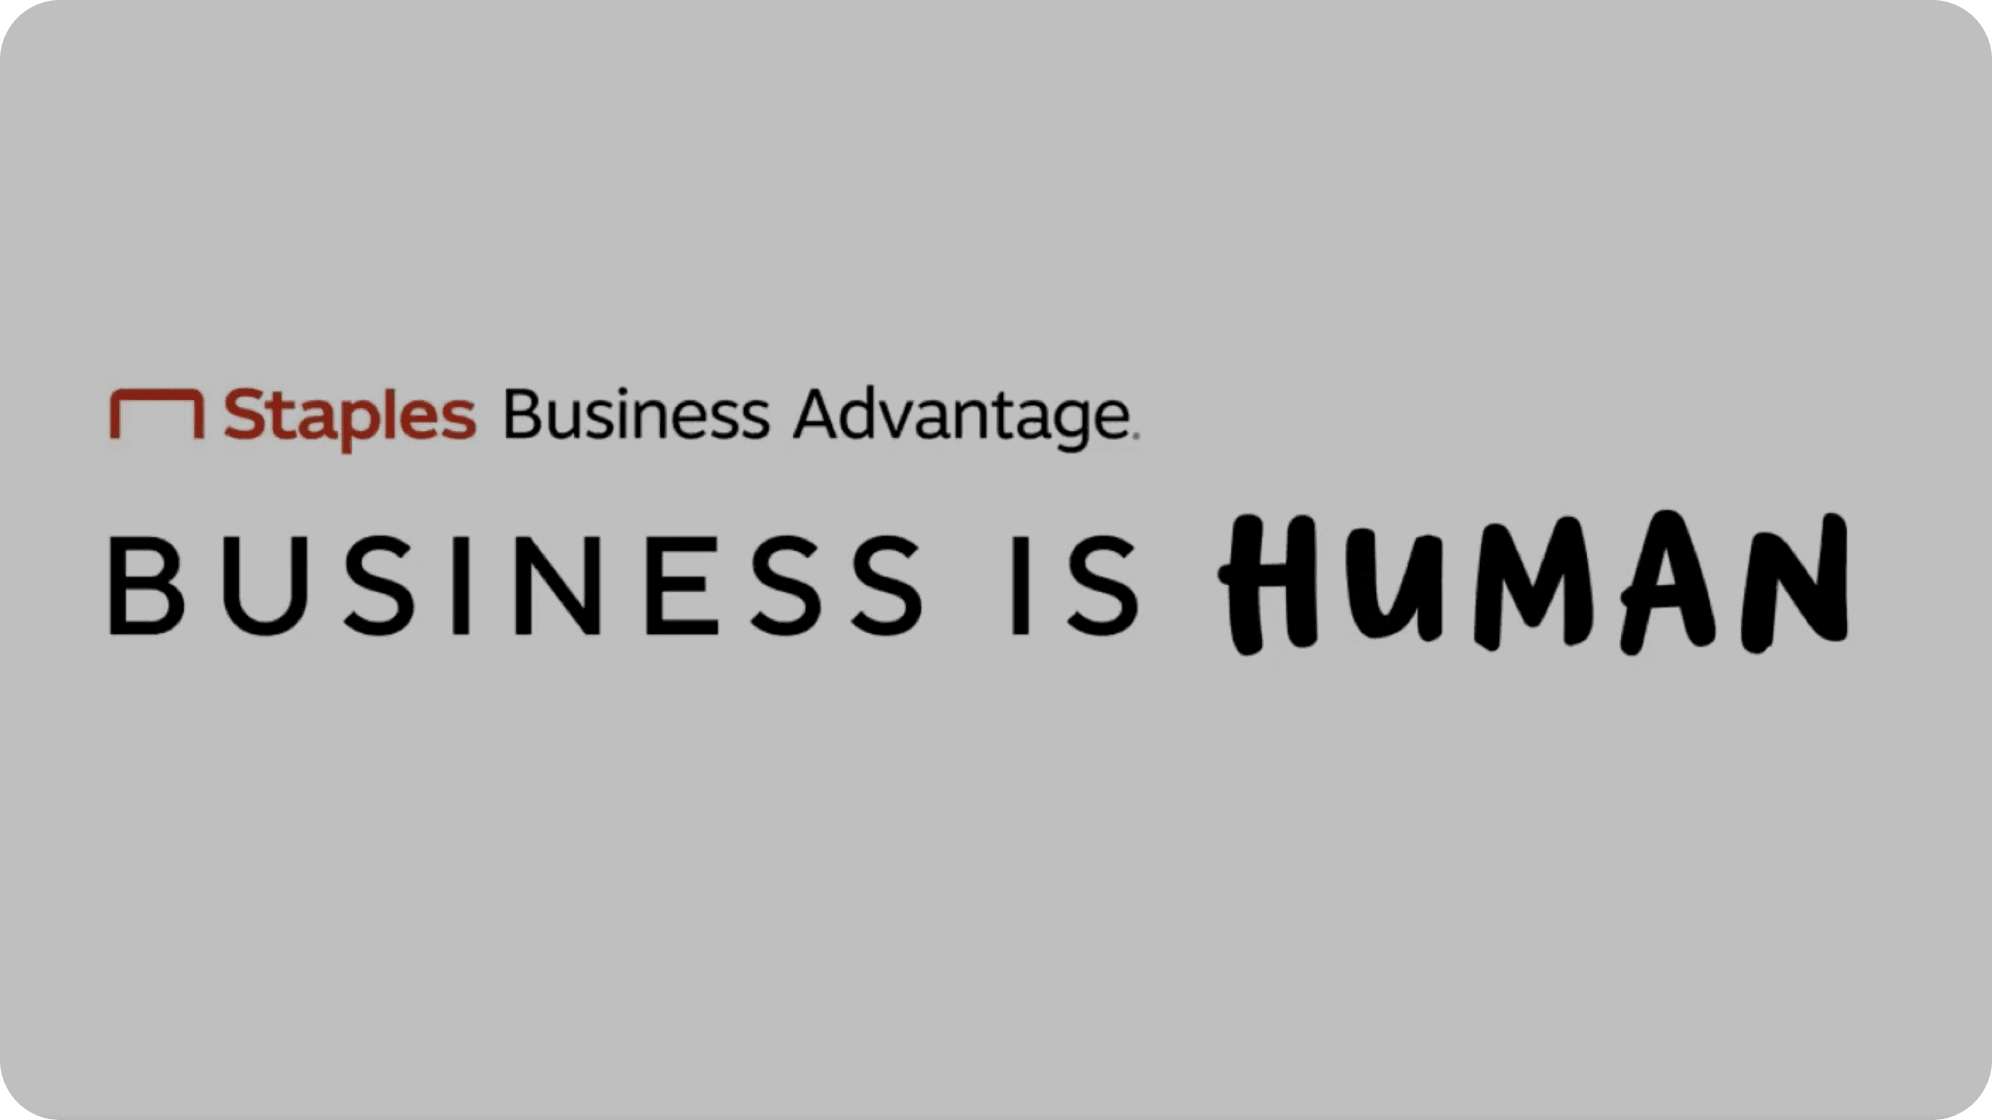 Business is Human Video Image